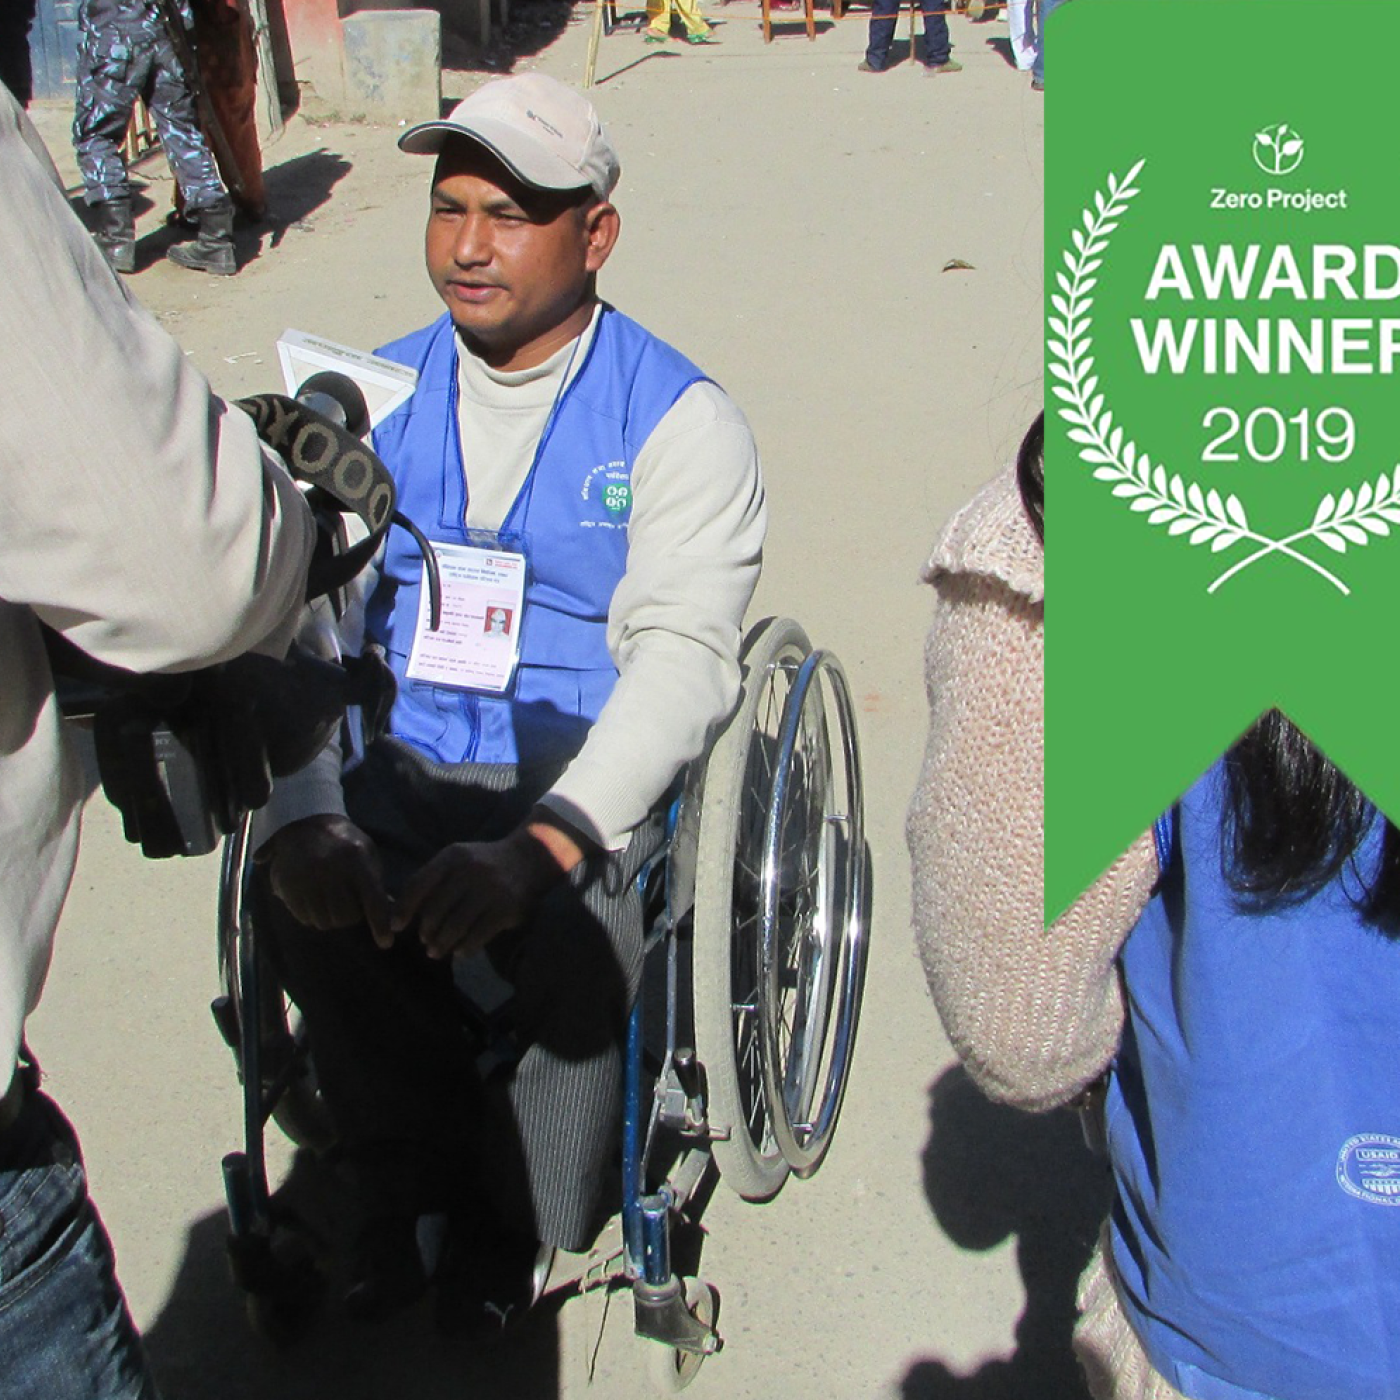 A member an election access observation team in Nepal is interviewed about his experience.